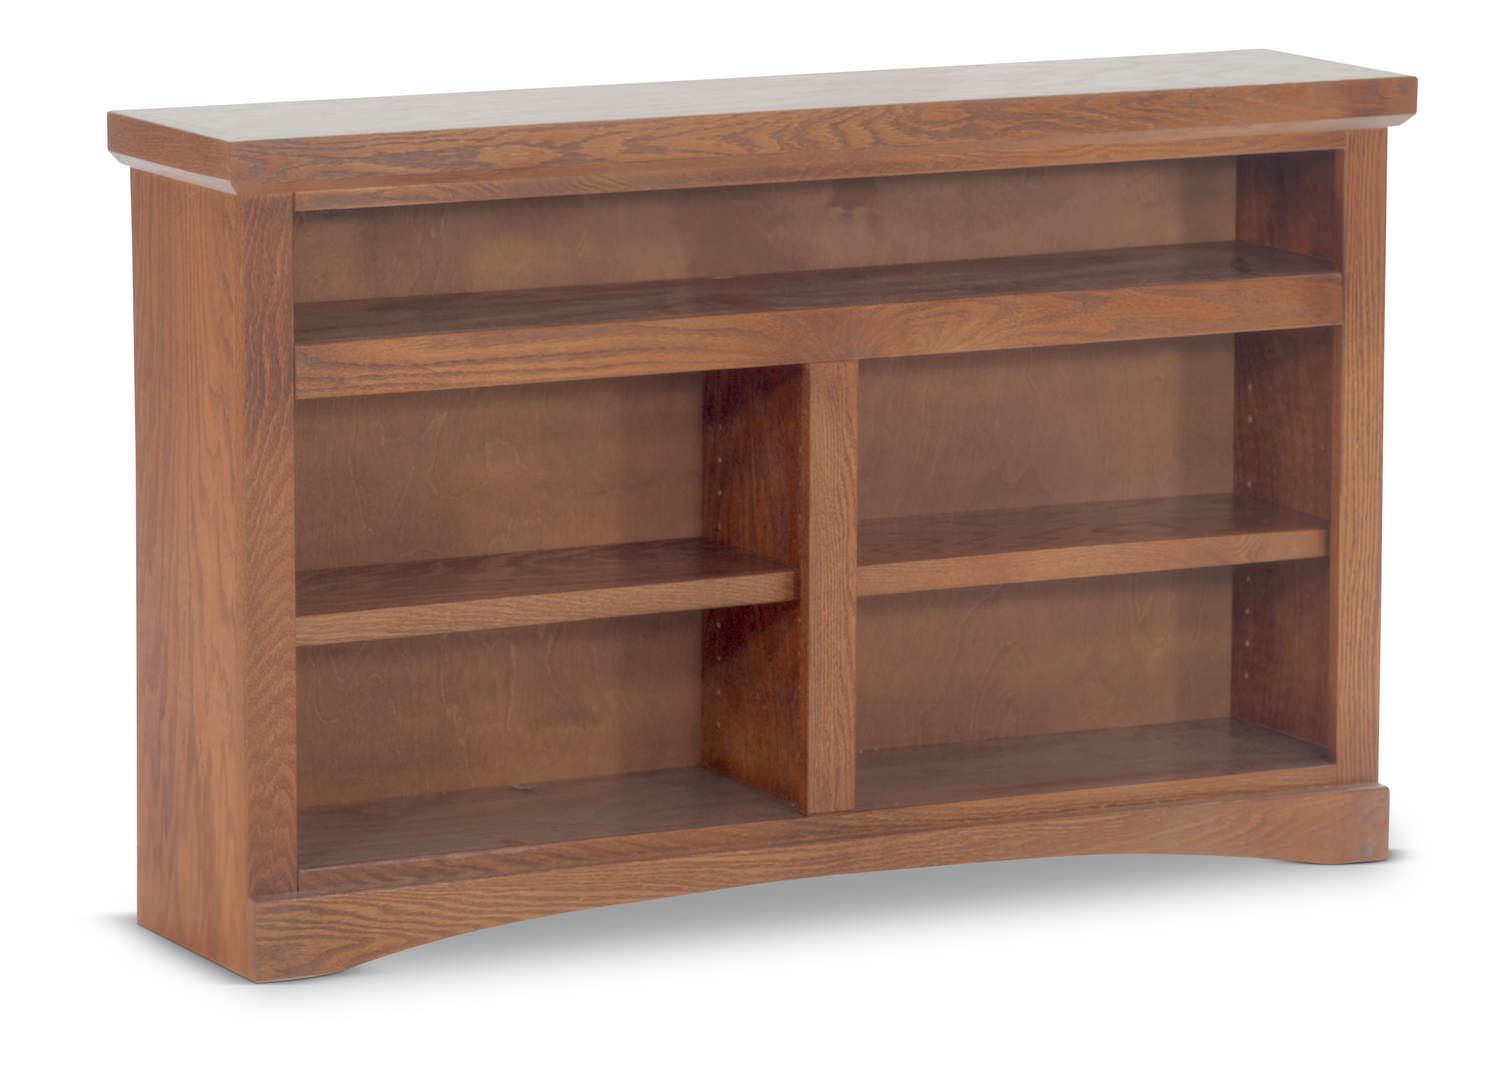 48″ Wide Mission Bookcasefurniture | Hom Furniture Pertaining To 48 Inch Bookcases (View 2 of 15)